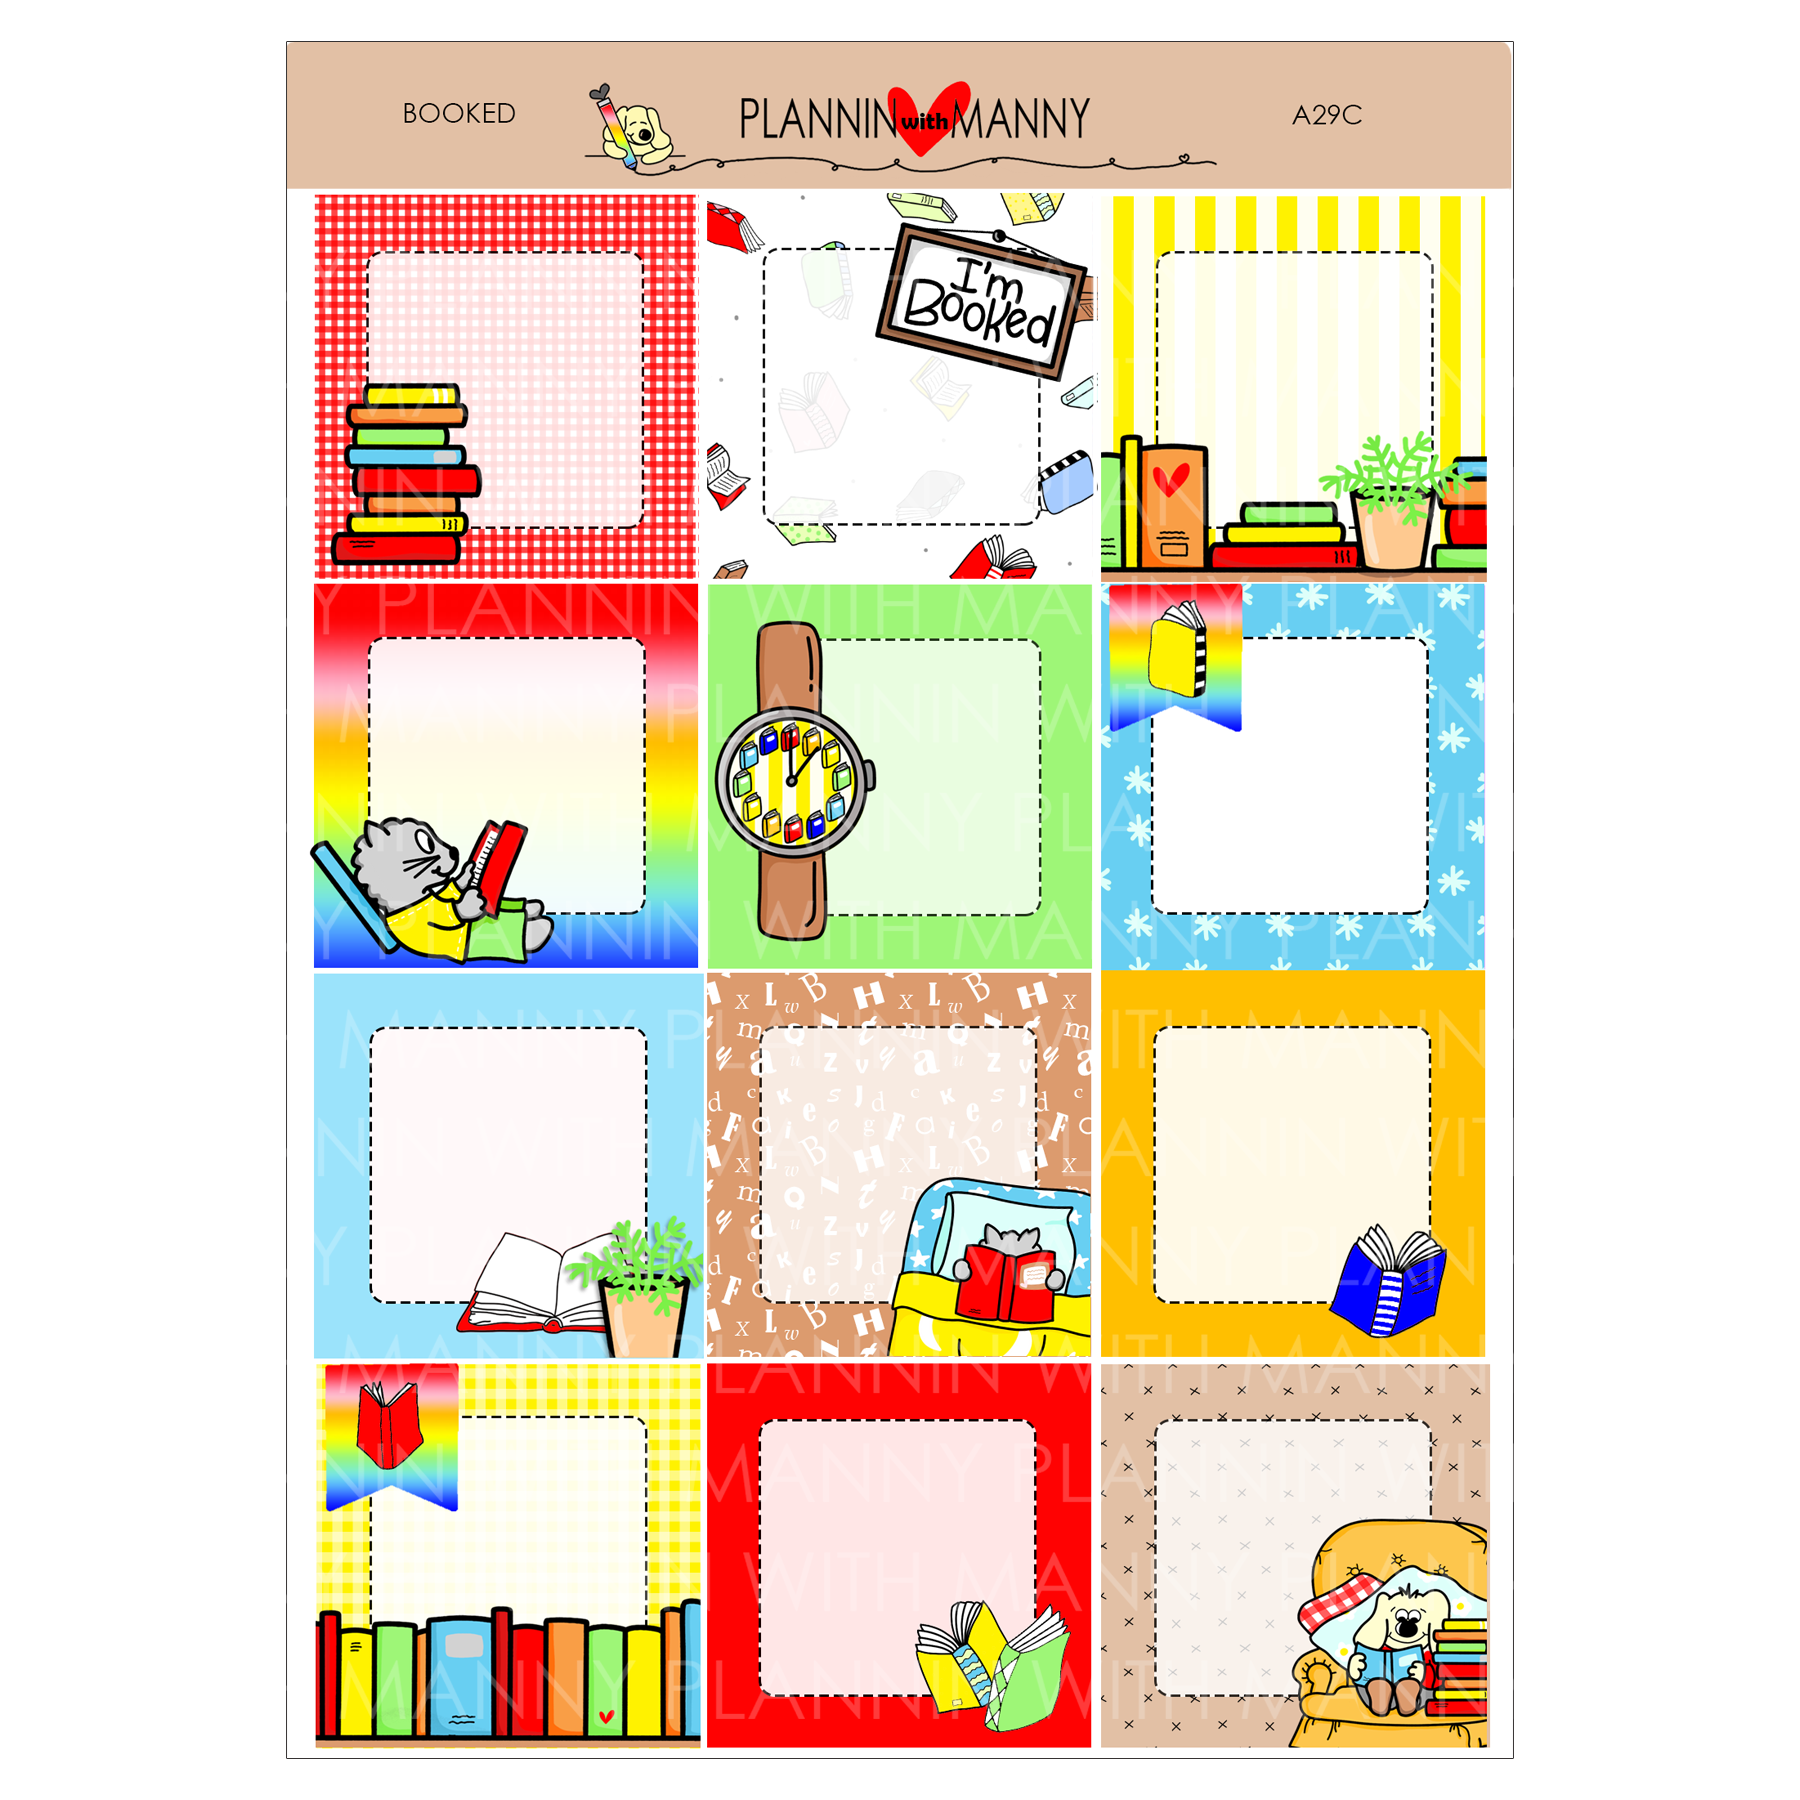 A29C I'm Booked 1.5" Square Planner Stickers